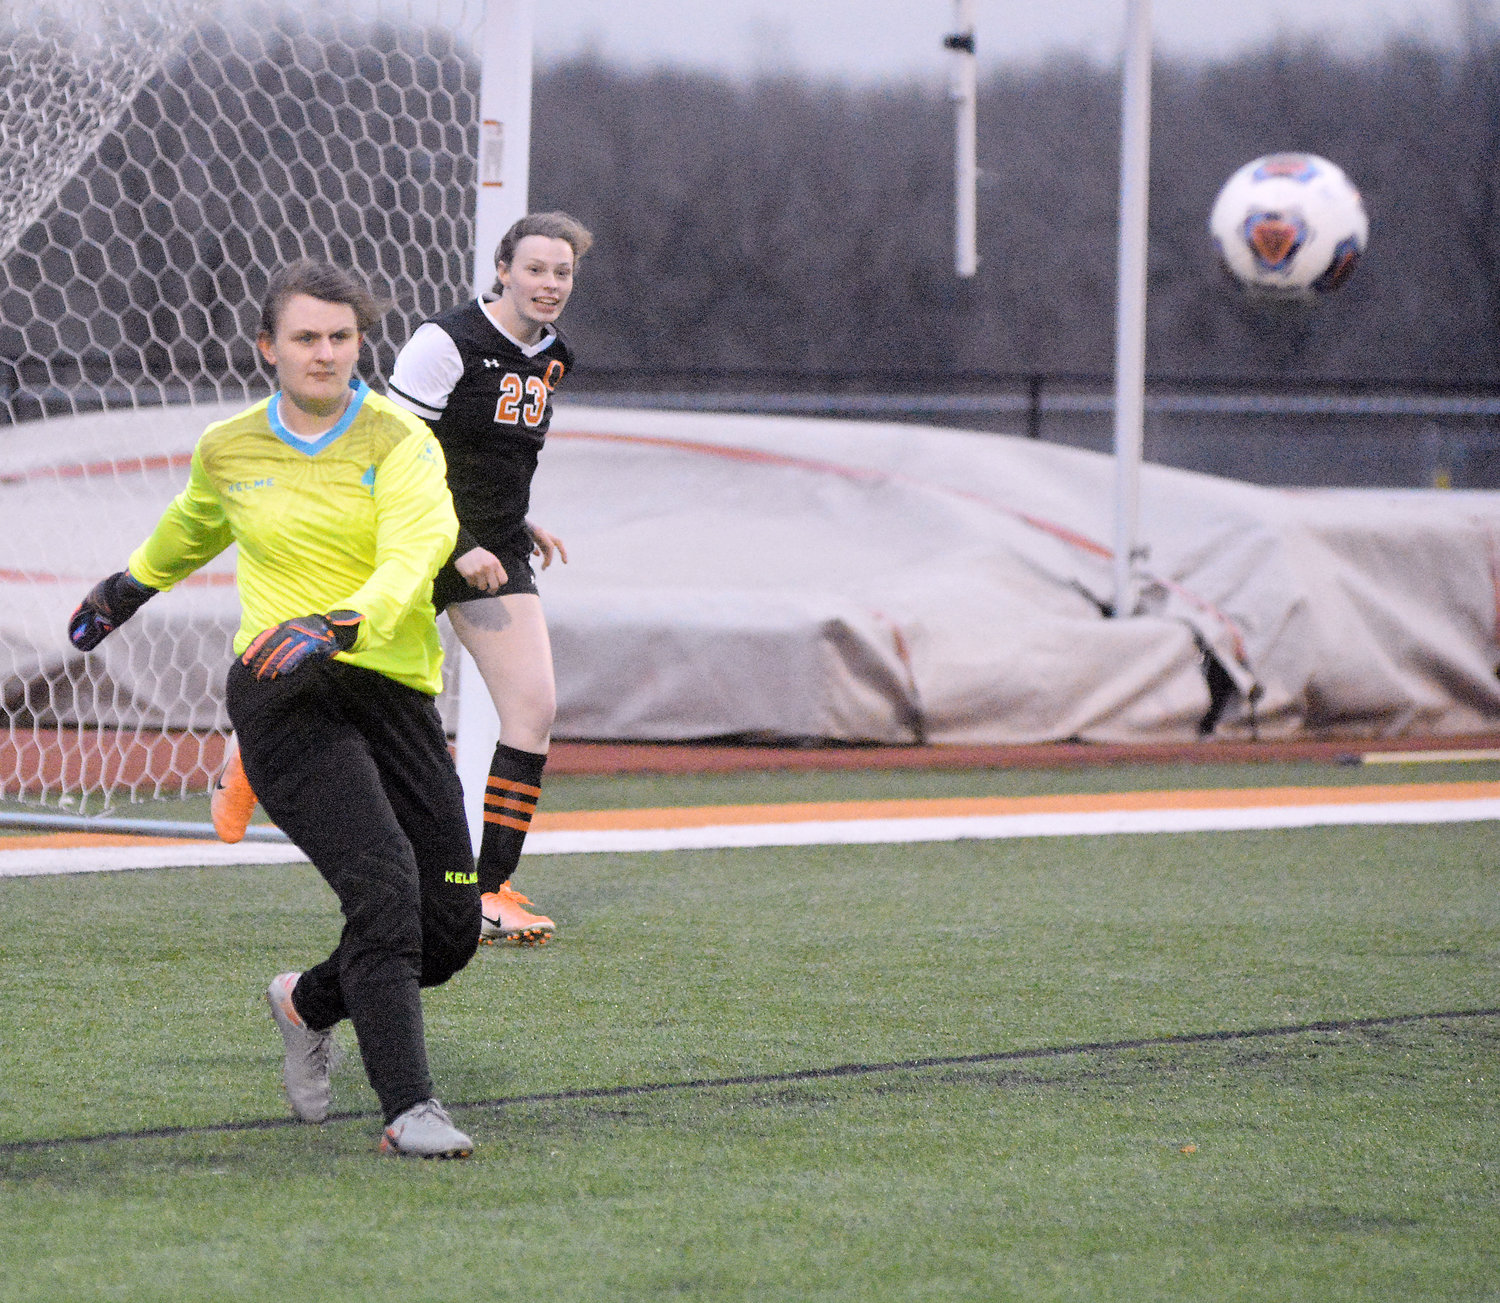 Loyd is also shown delivering a goal kick with teammate Kiana Guerrero watching the flight path of the ball.